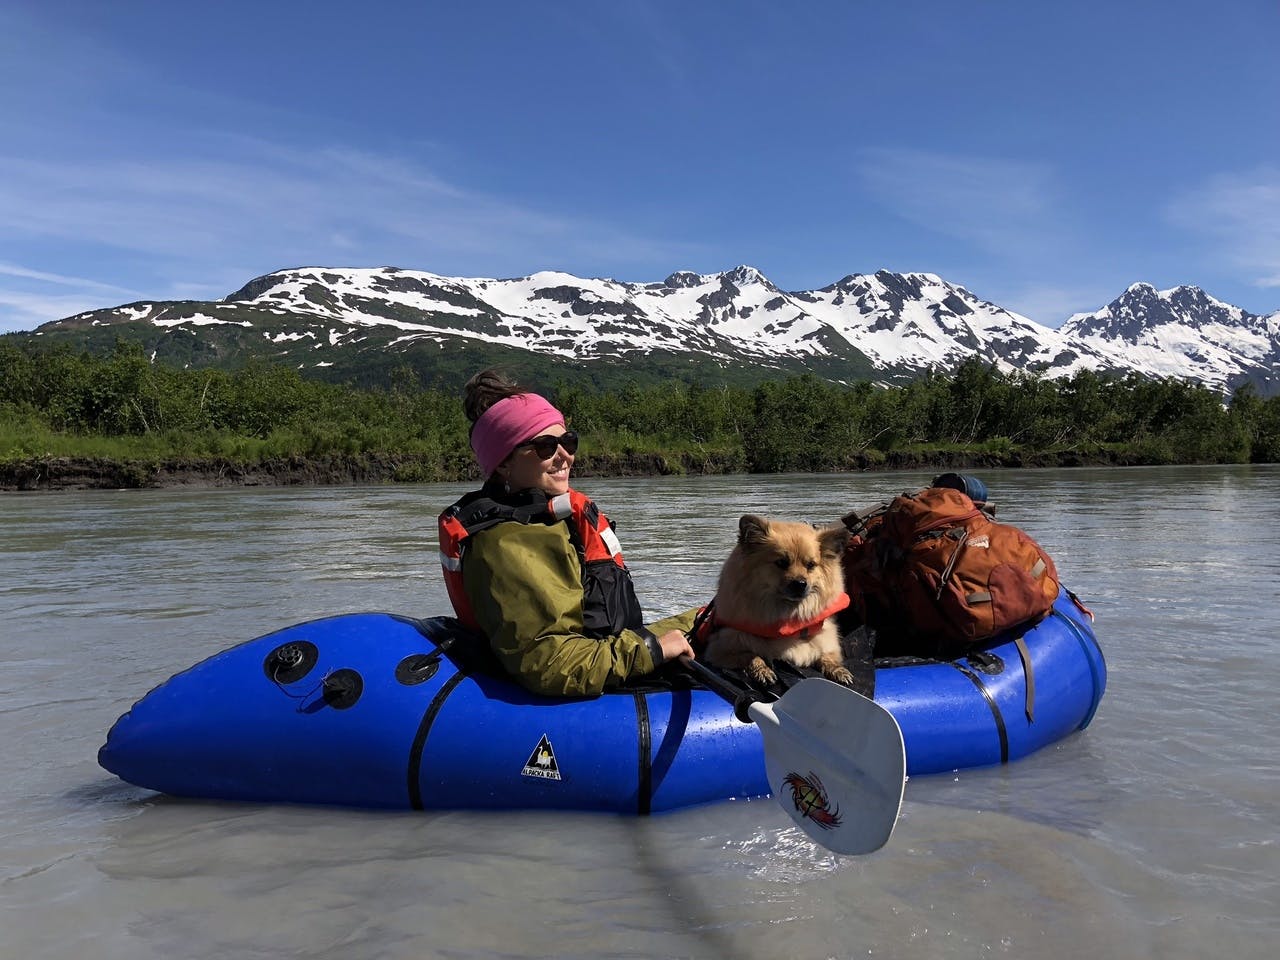 Aimee Chauvot: &#x201C;Leo&#x2019;s First Float: Adam White captured this picture of his wife, Aimee, and fur-baby Leo, on the Placer River float in Alaska this summer. She (the dog) was a natural!&#x201D;